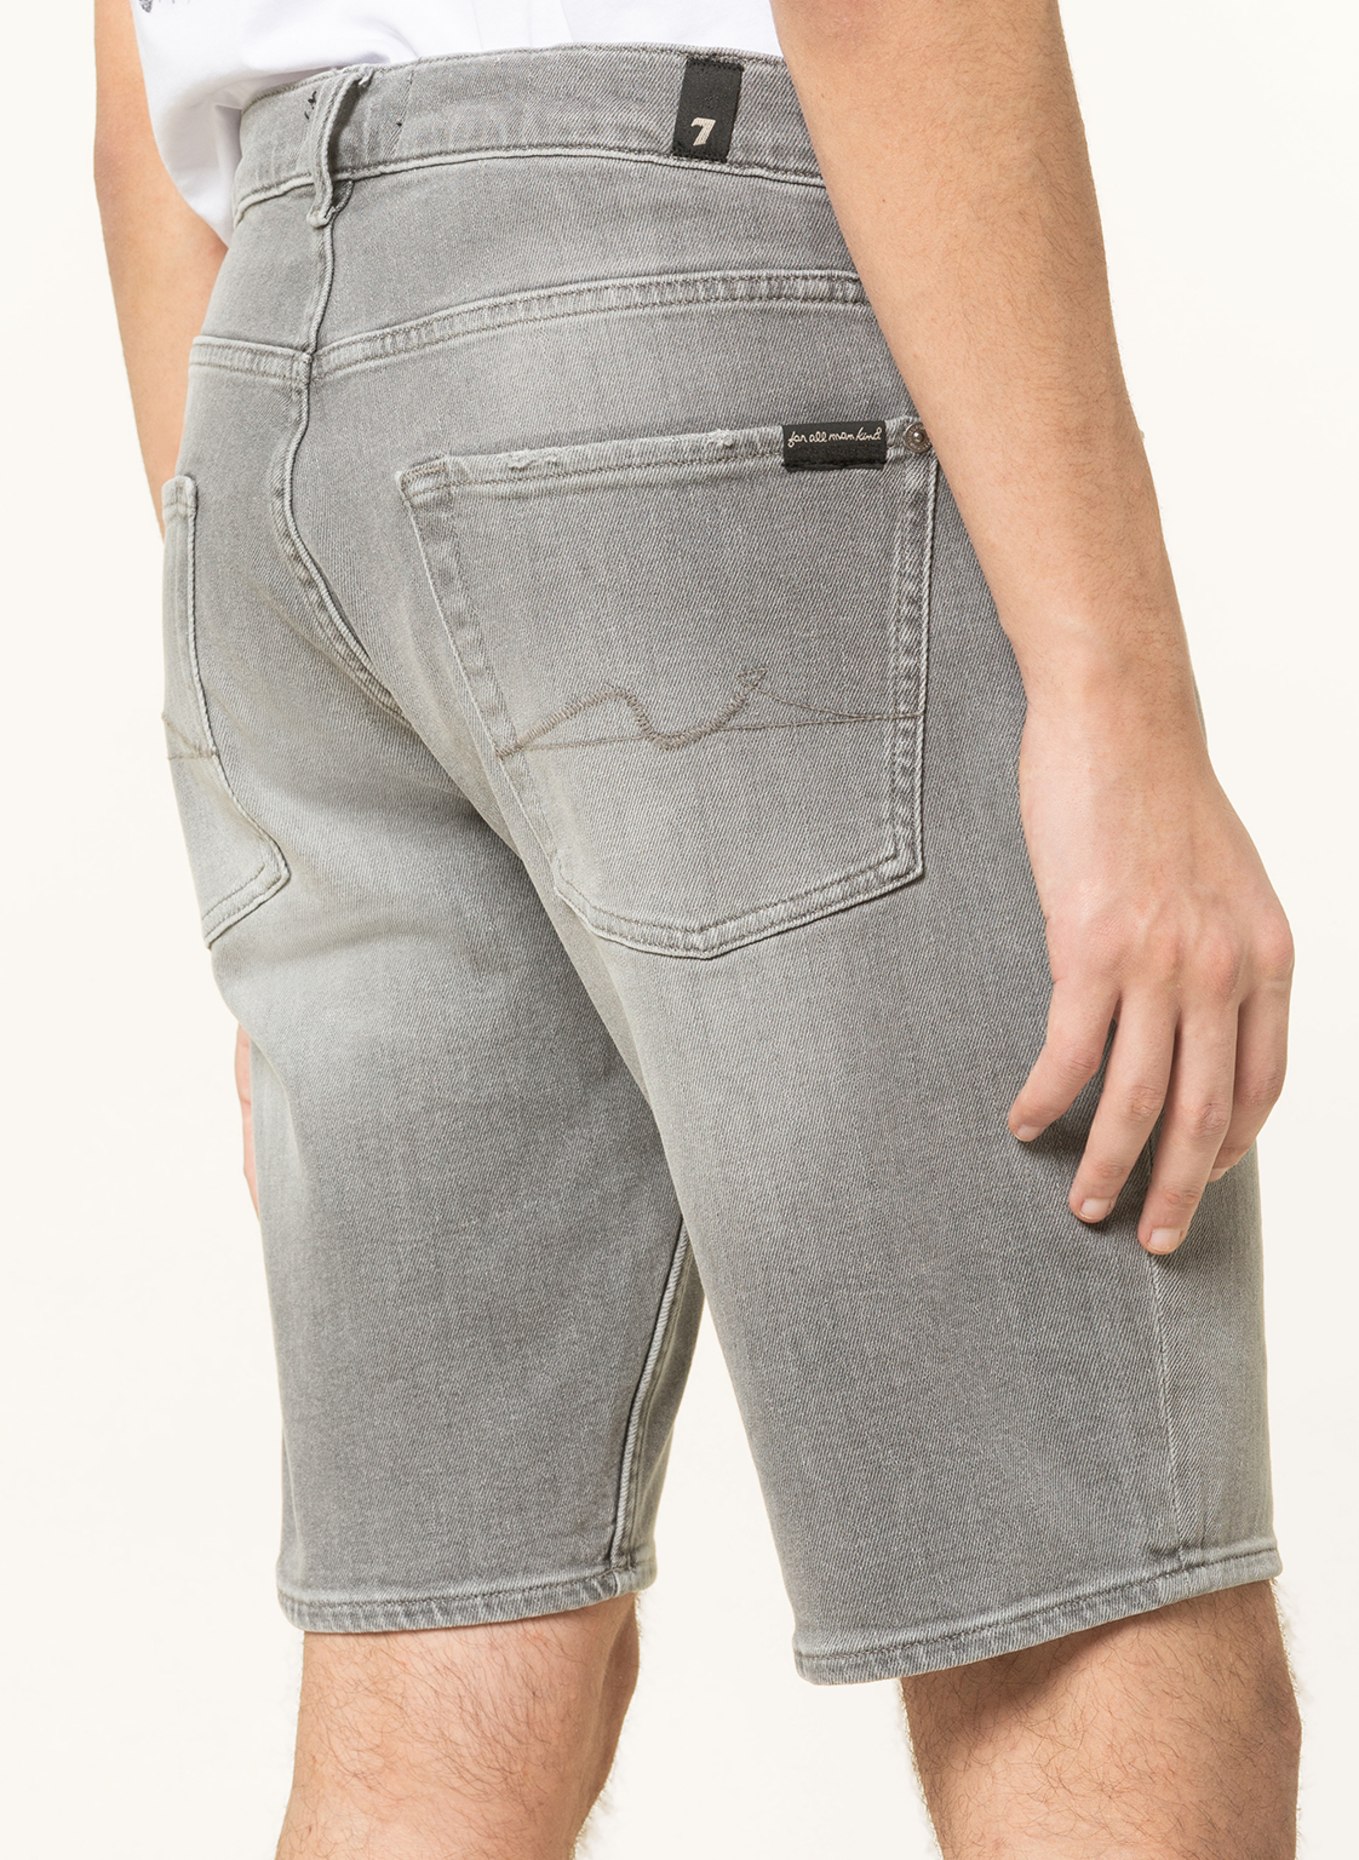 7 for all mankind Jeansshorts SO BADLY Regular Fit, Farbe: GREY (Bild 5)